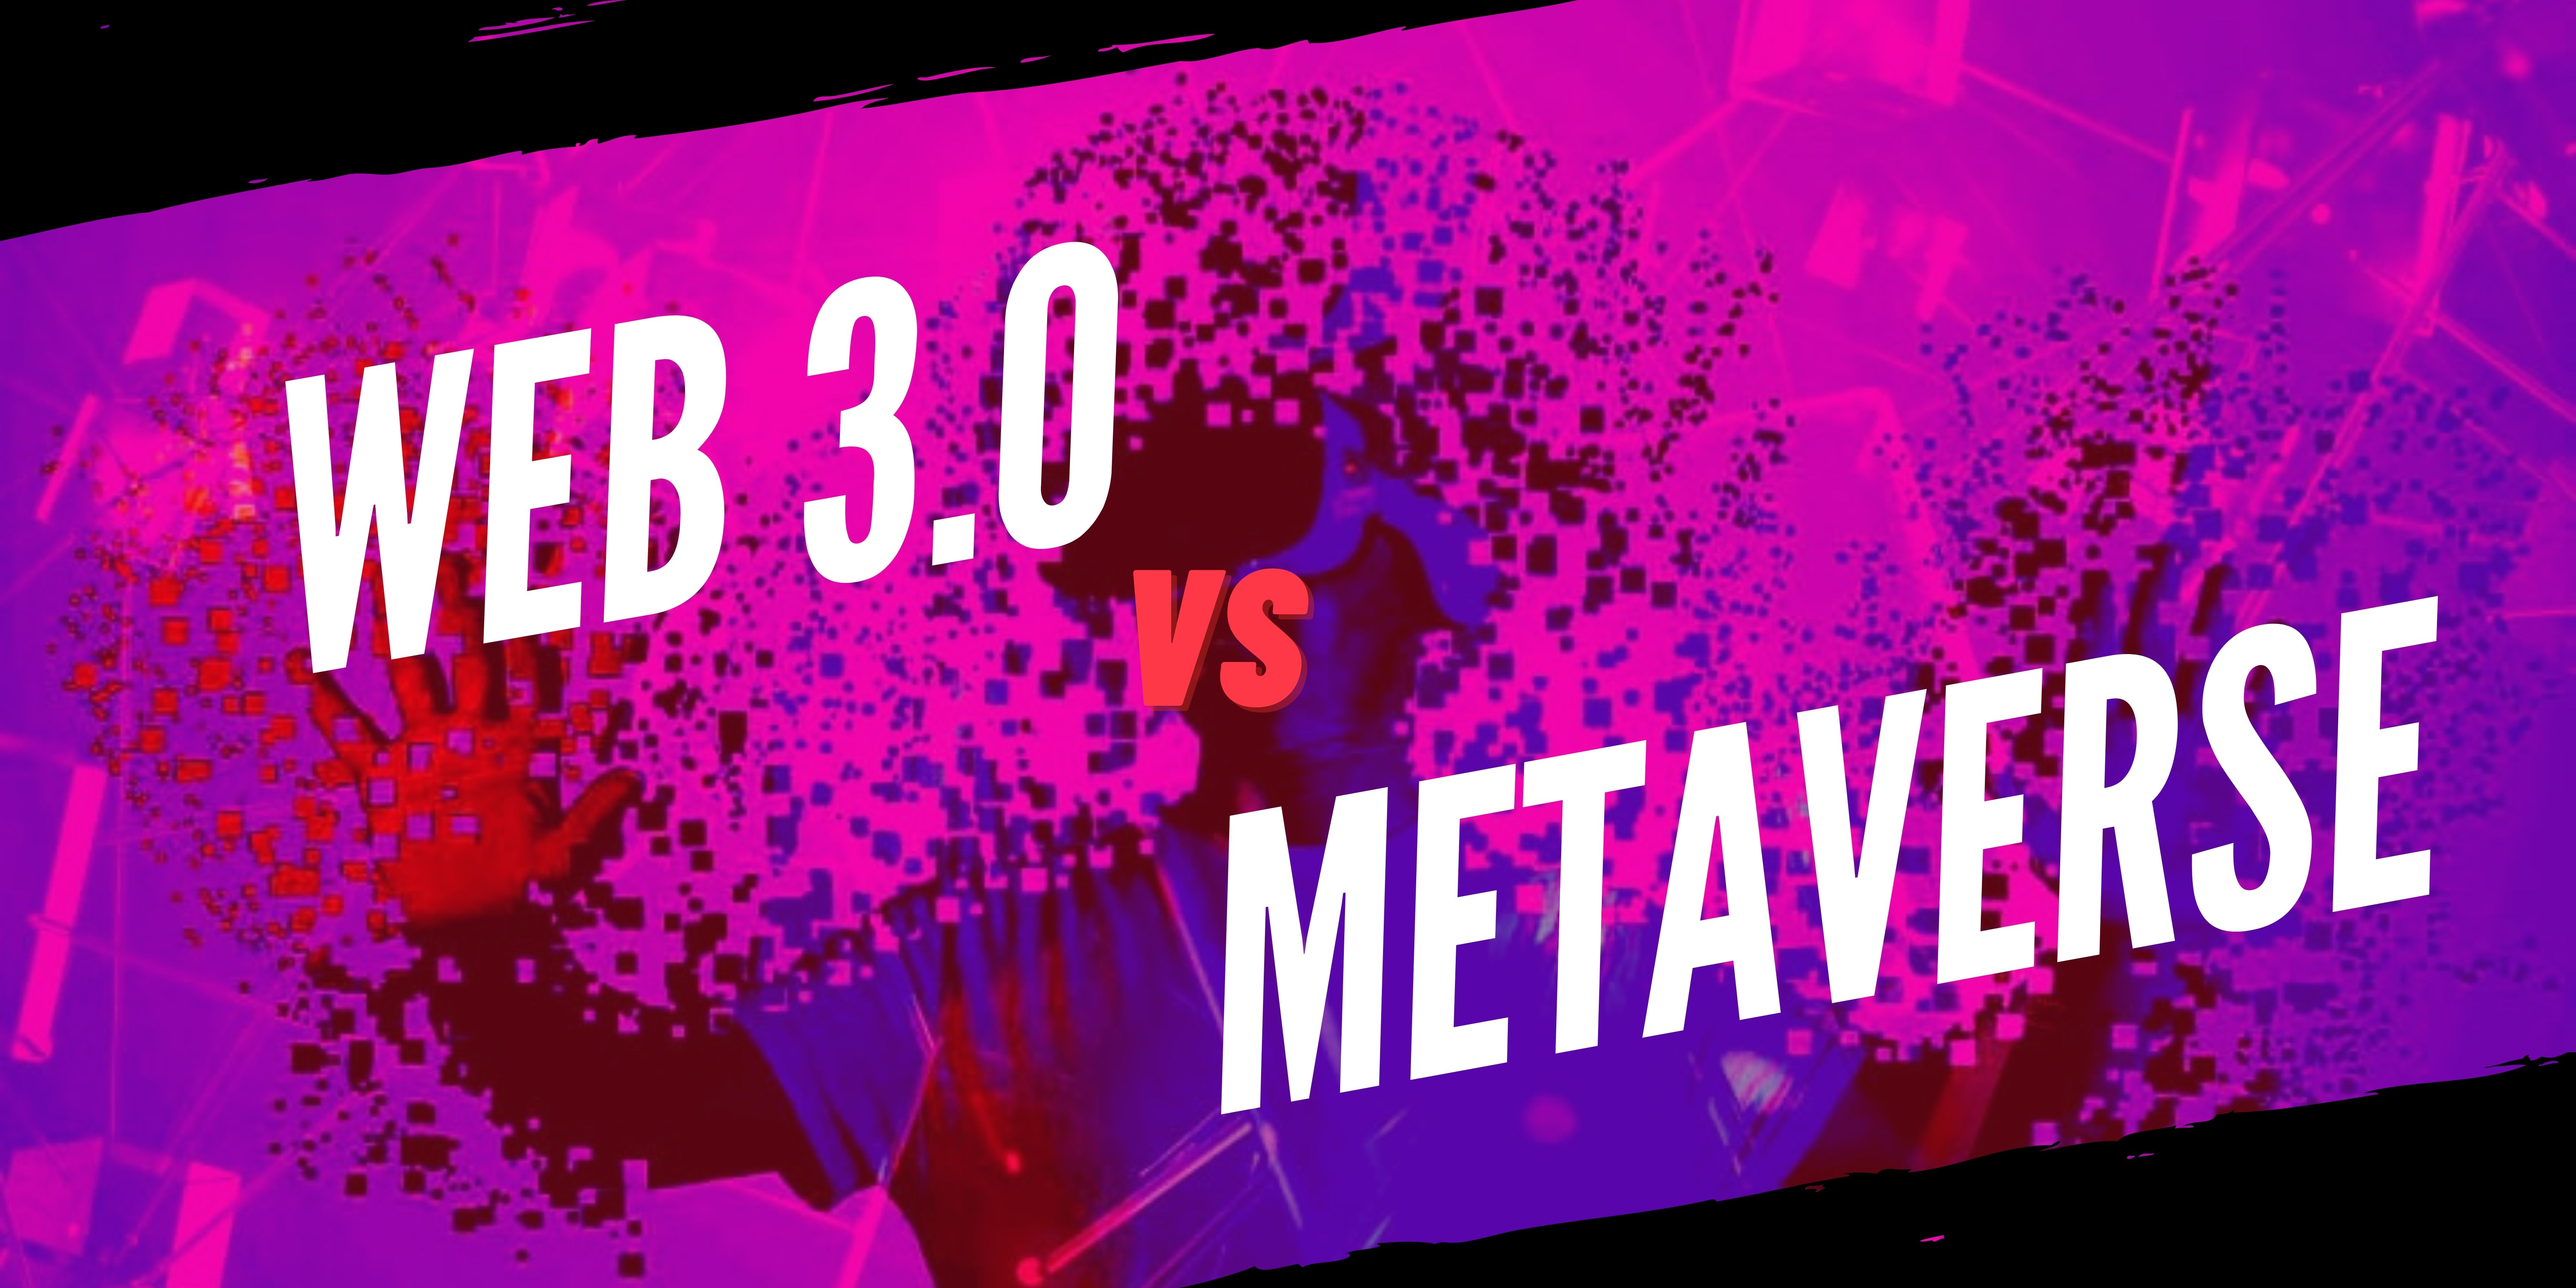 Web 3.0 vs. Metaverse: A detailed comparison [UPDATED